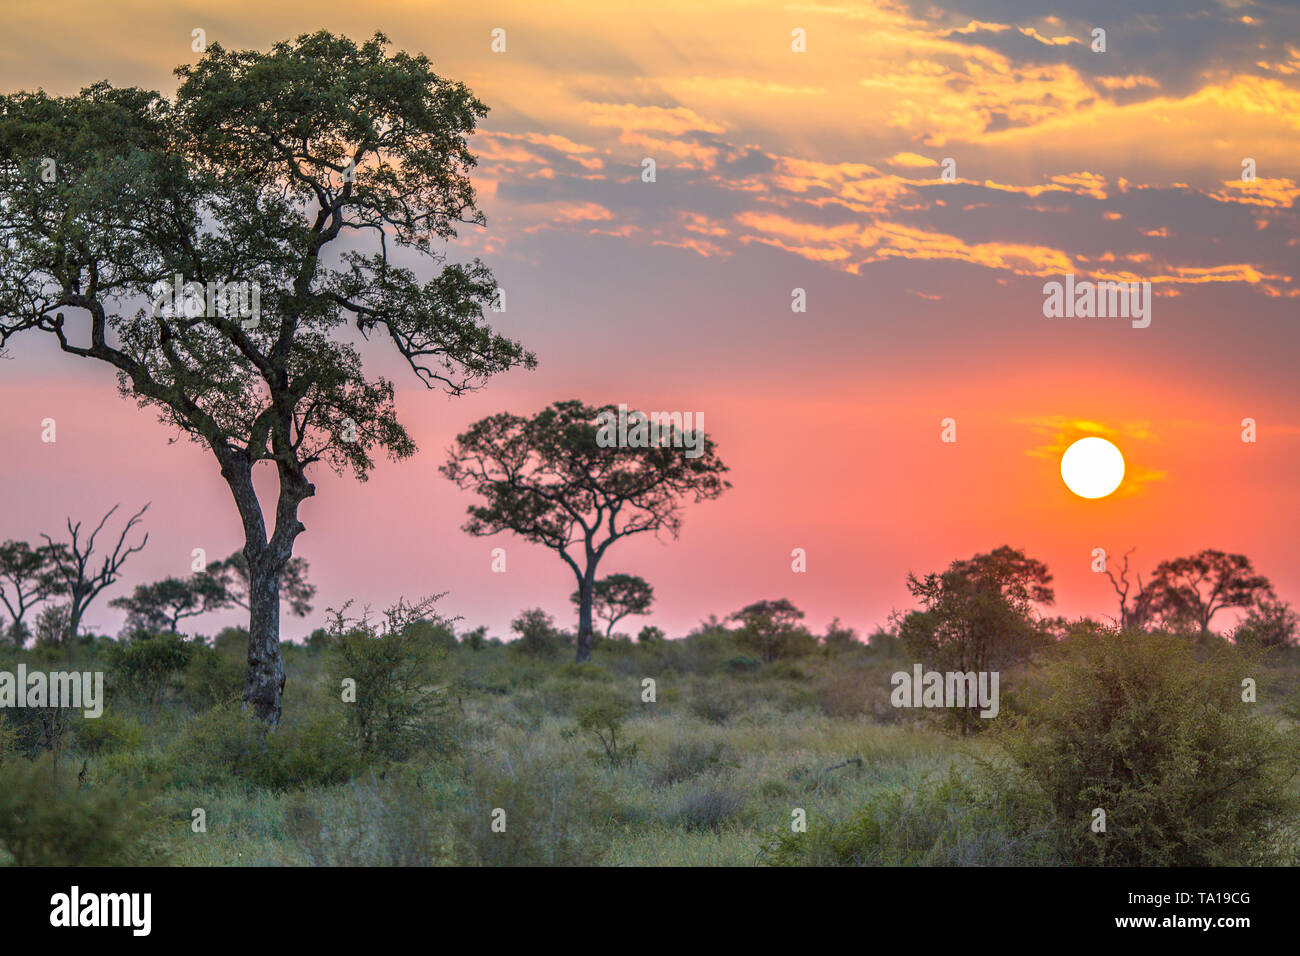 African Savanna plain overview with trees bushes and grass at sunset in Kruger national park South Africa Stock Photo